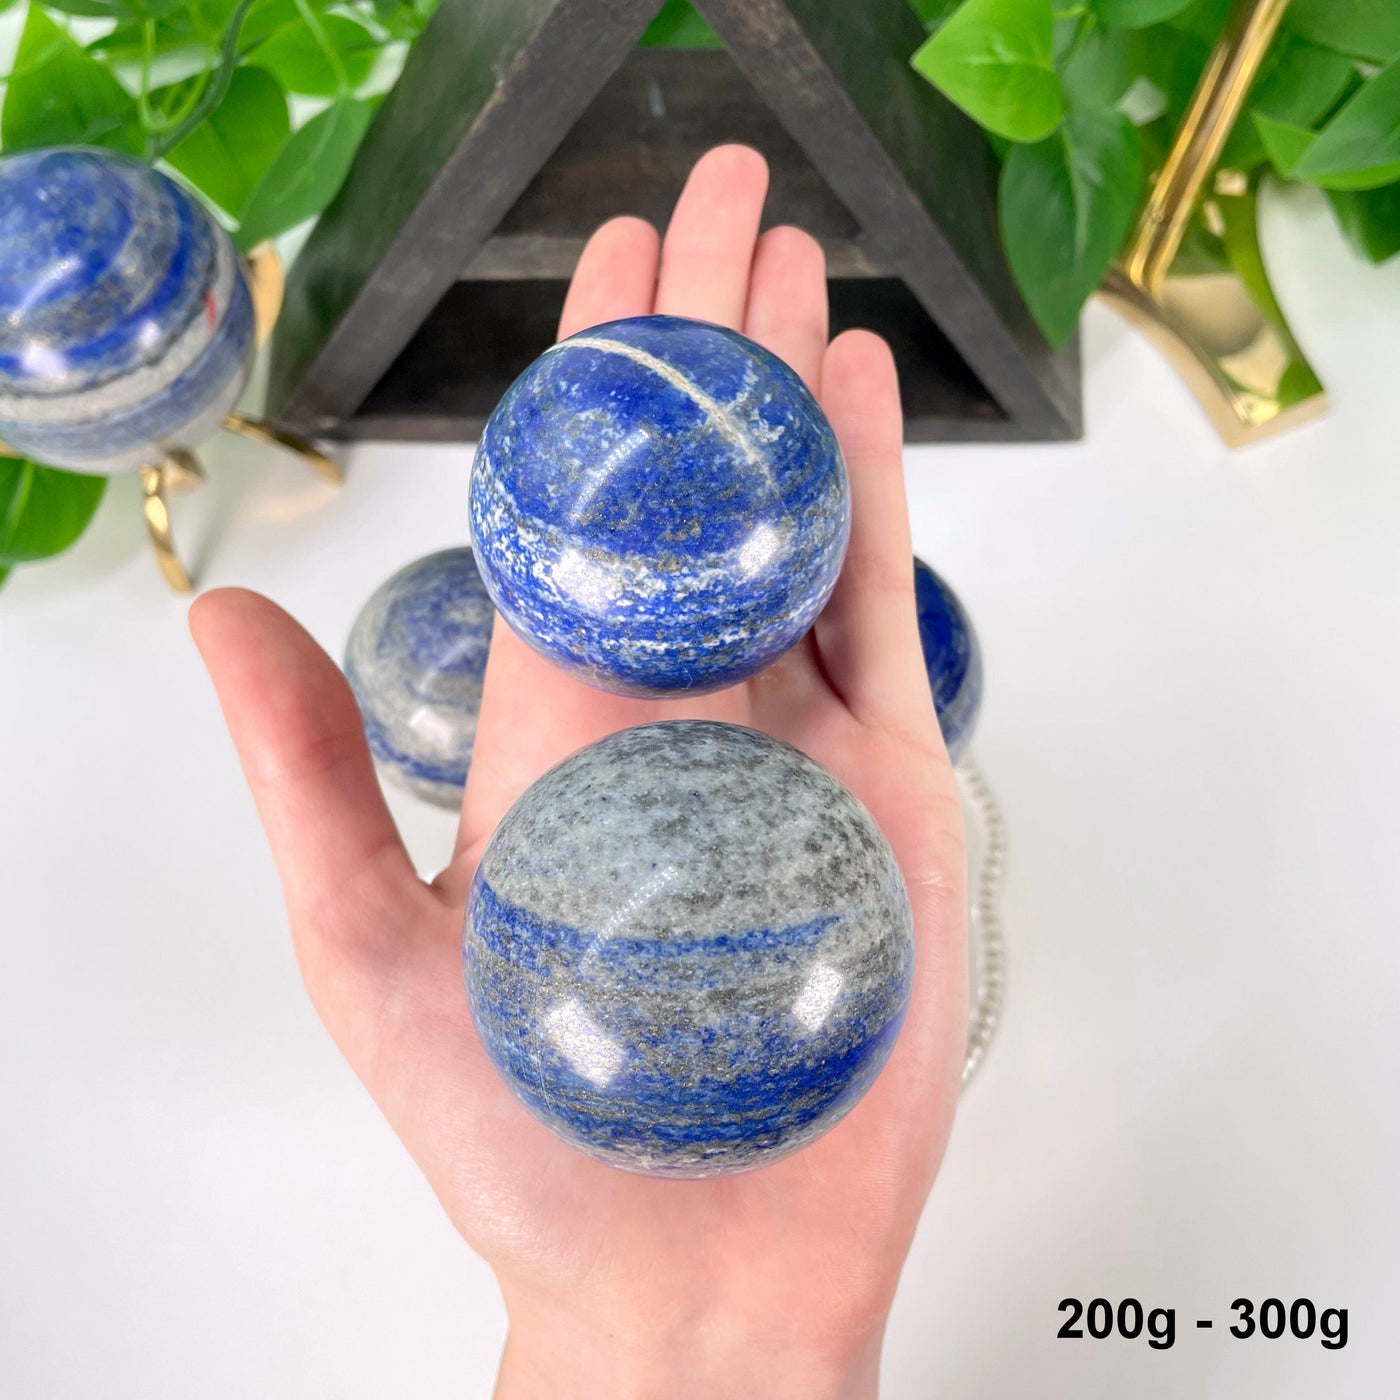 two 200g - 300g lapis lazuli polished spheres in hand 